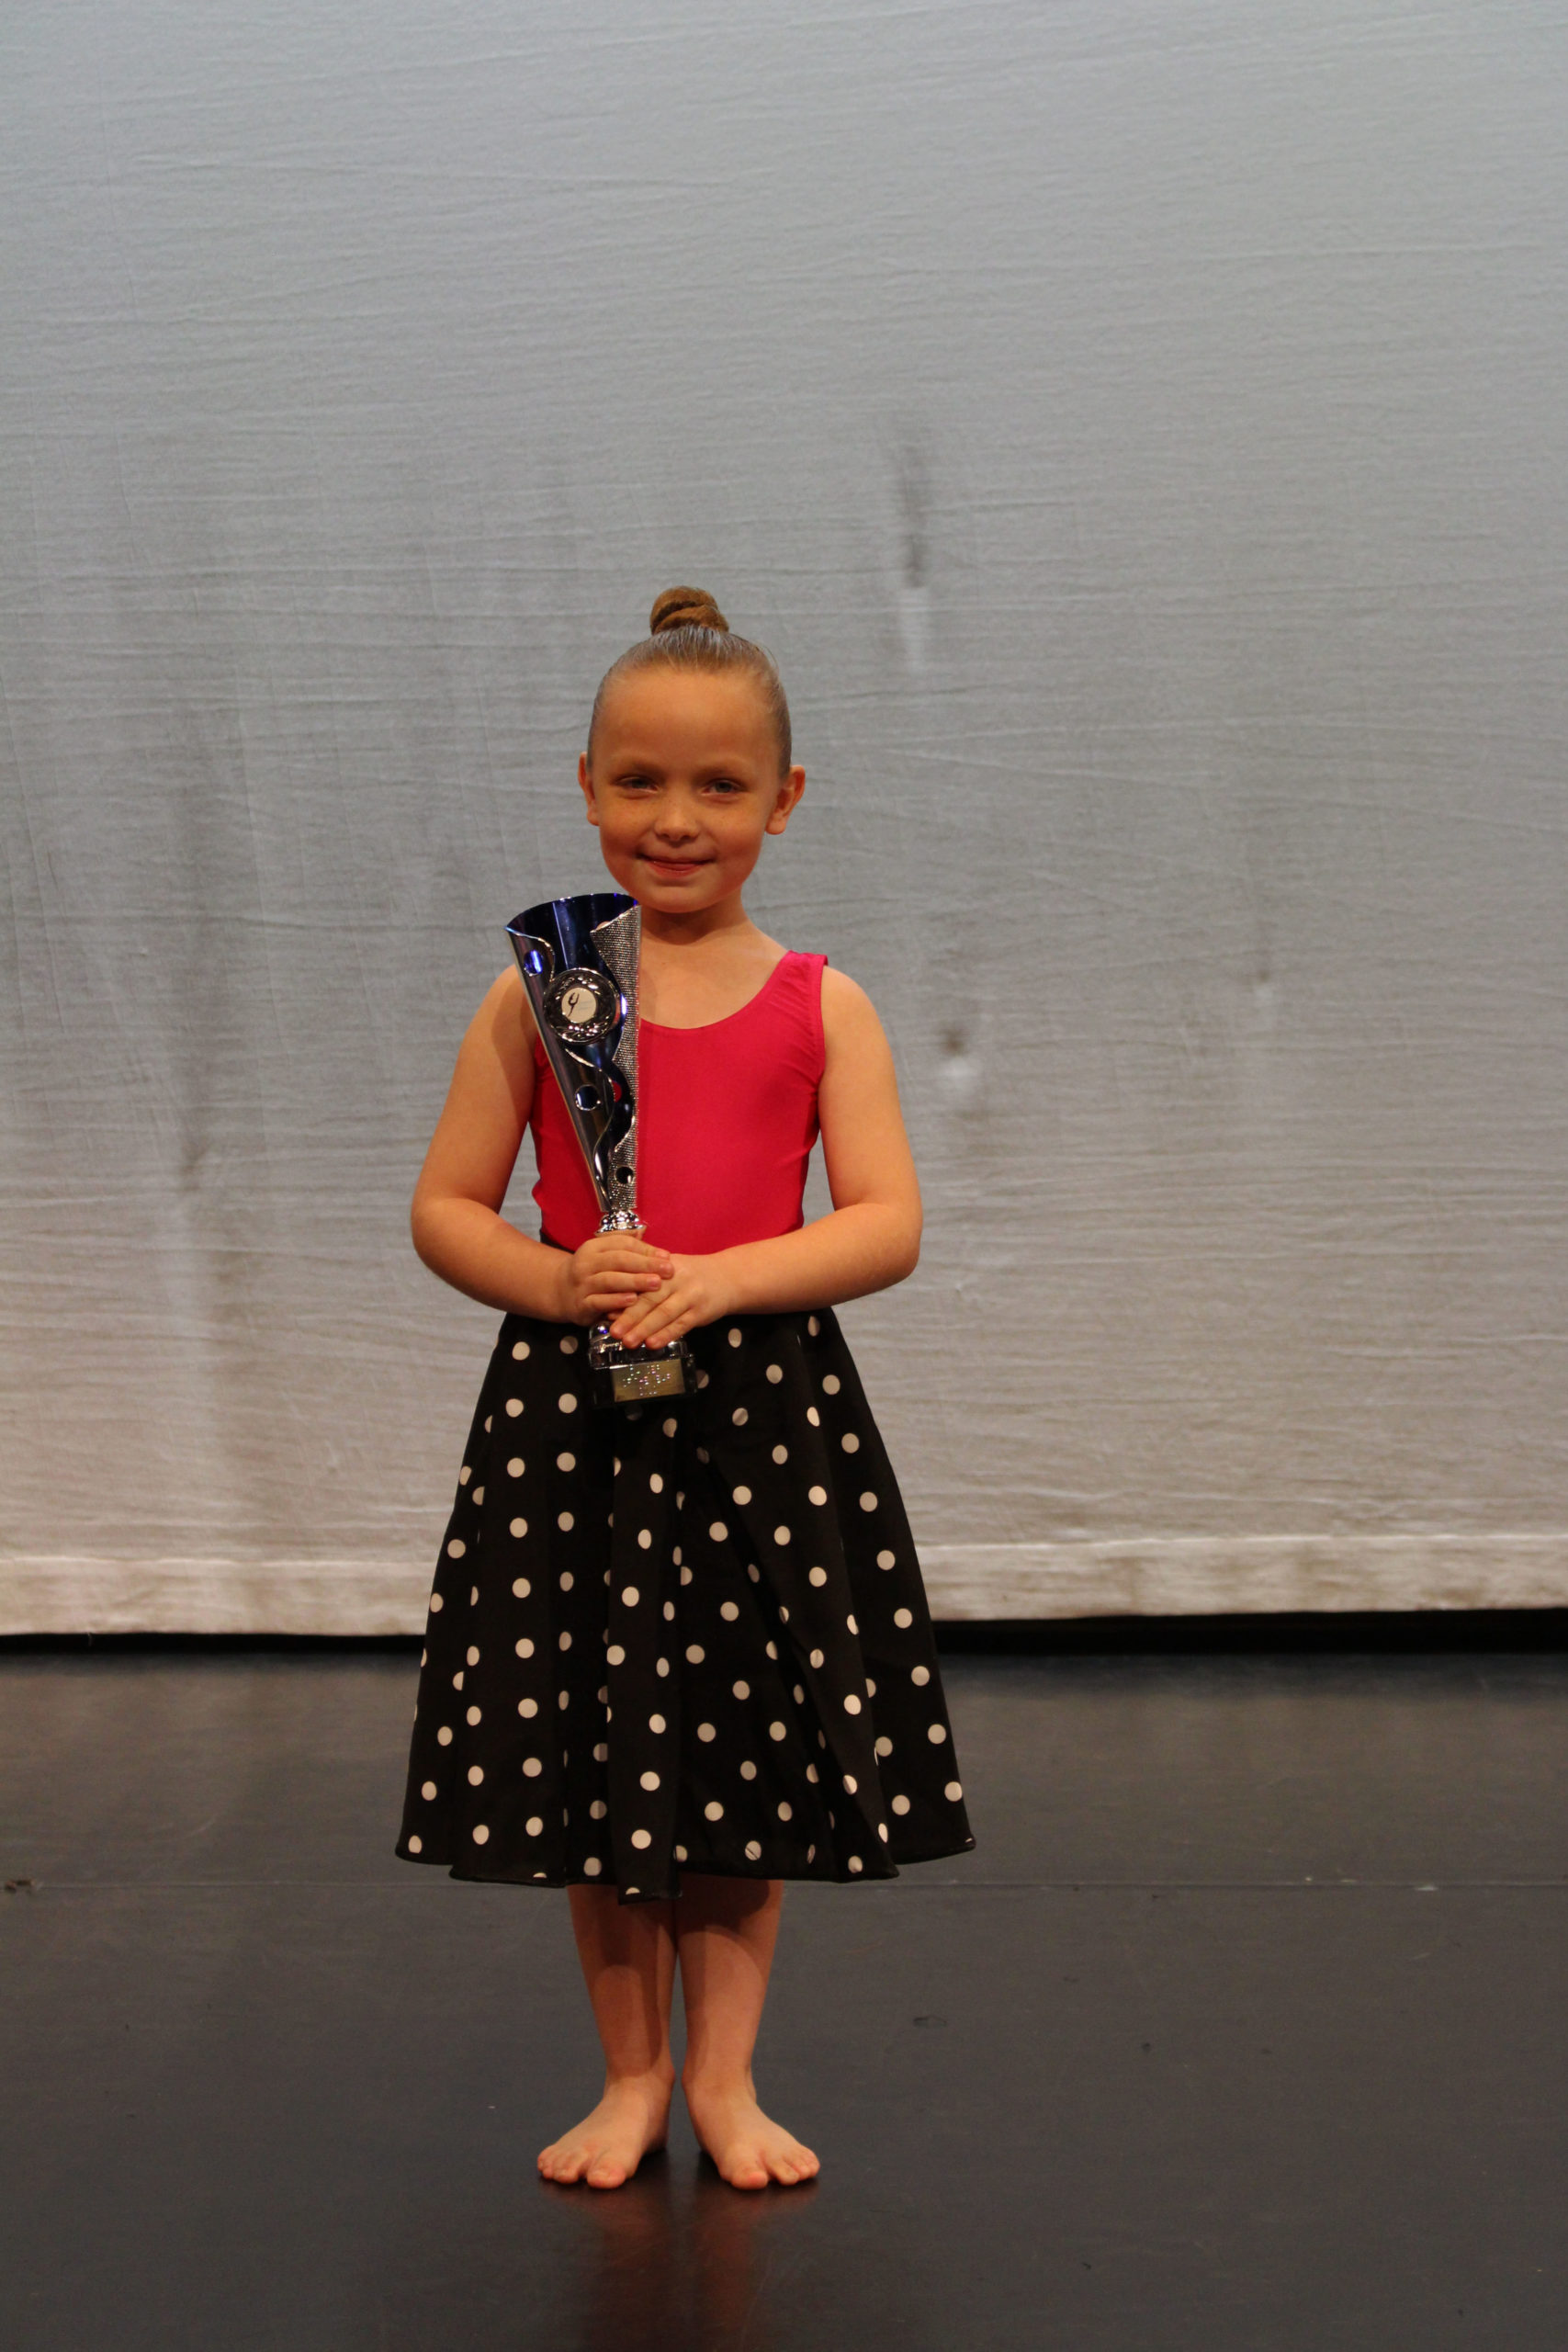 Dancer of the year 2022